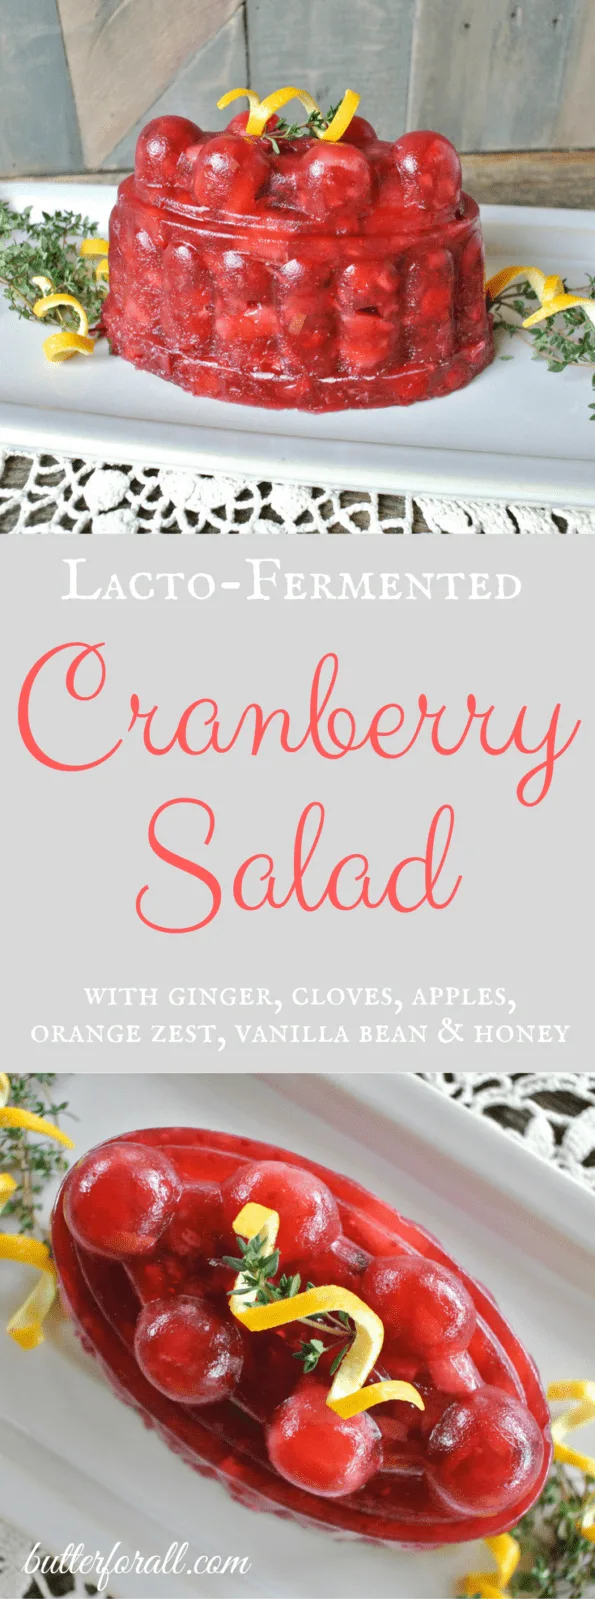 A collage of molded lacto-fermented cranberry salad with text overlay.